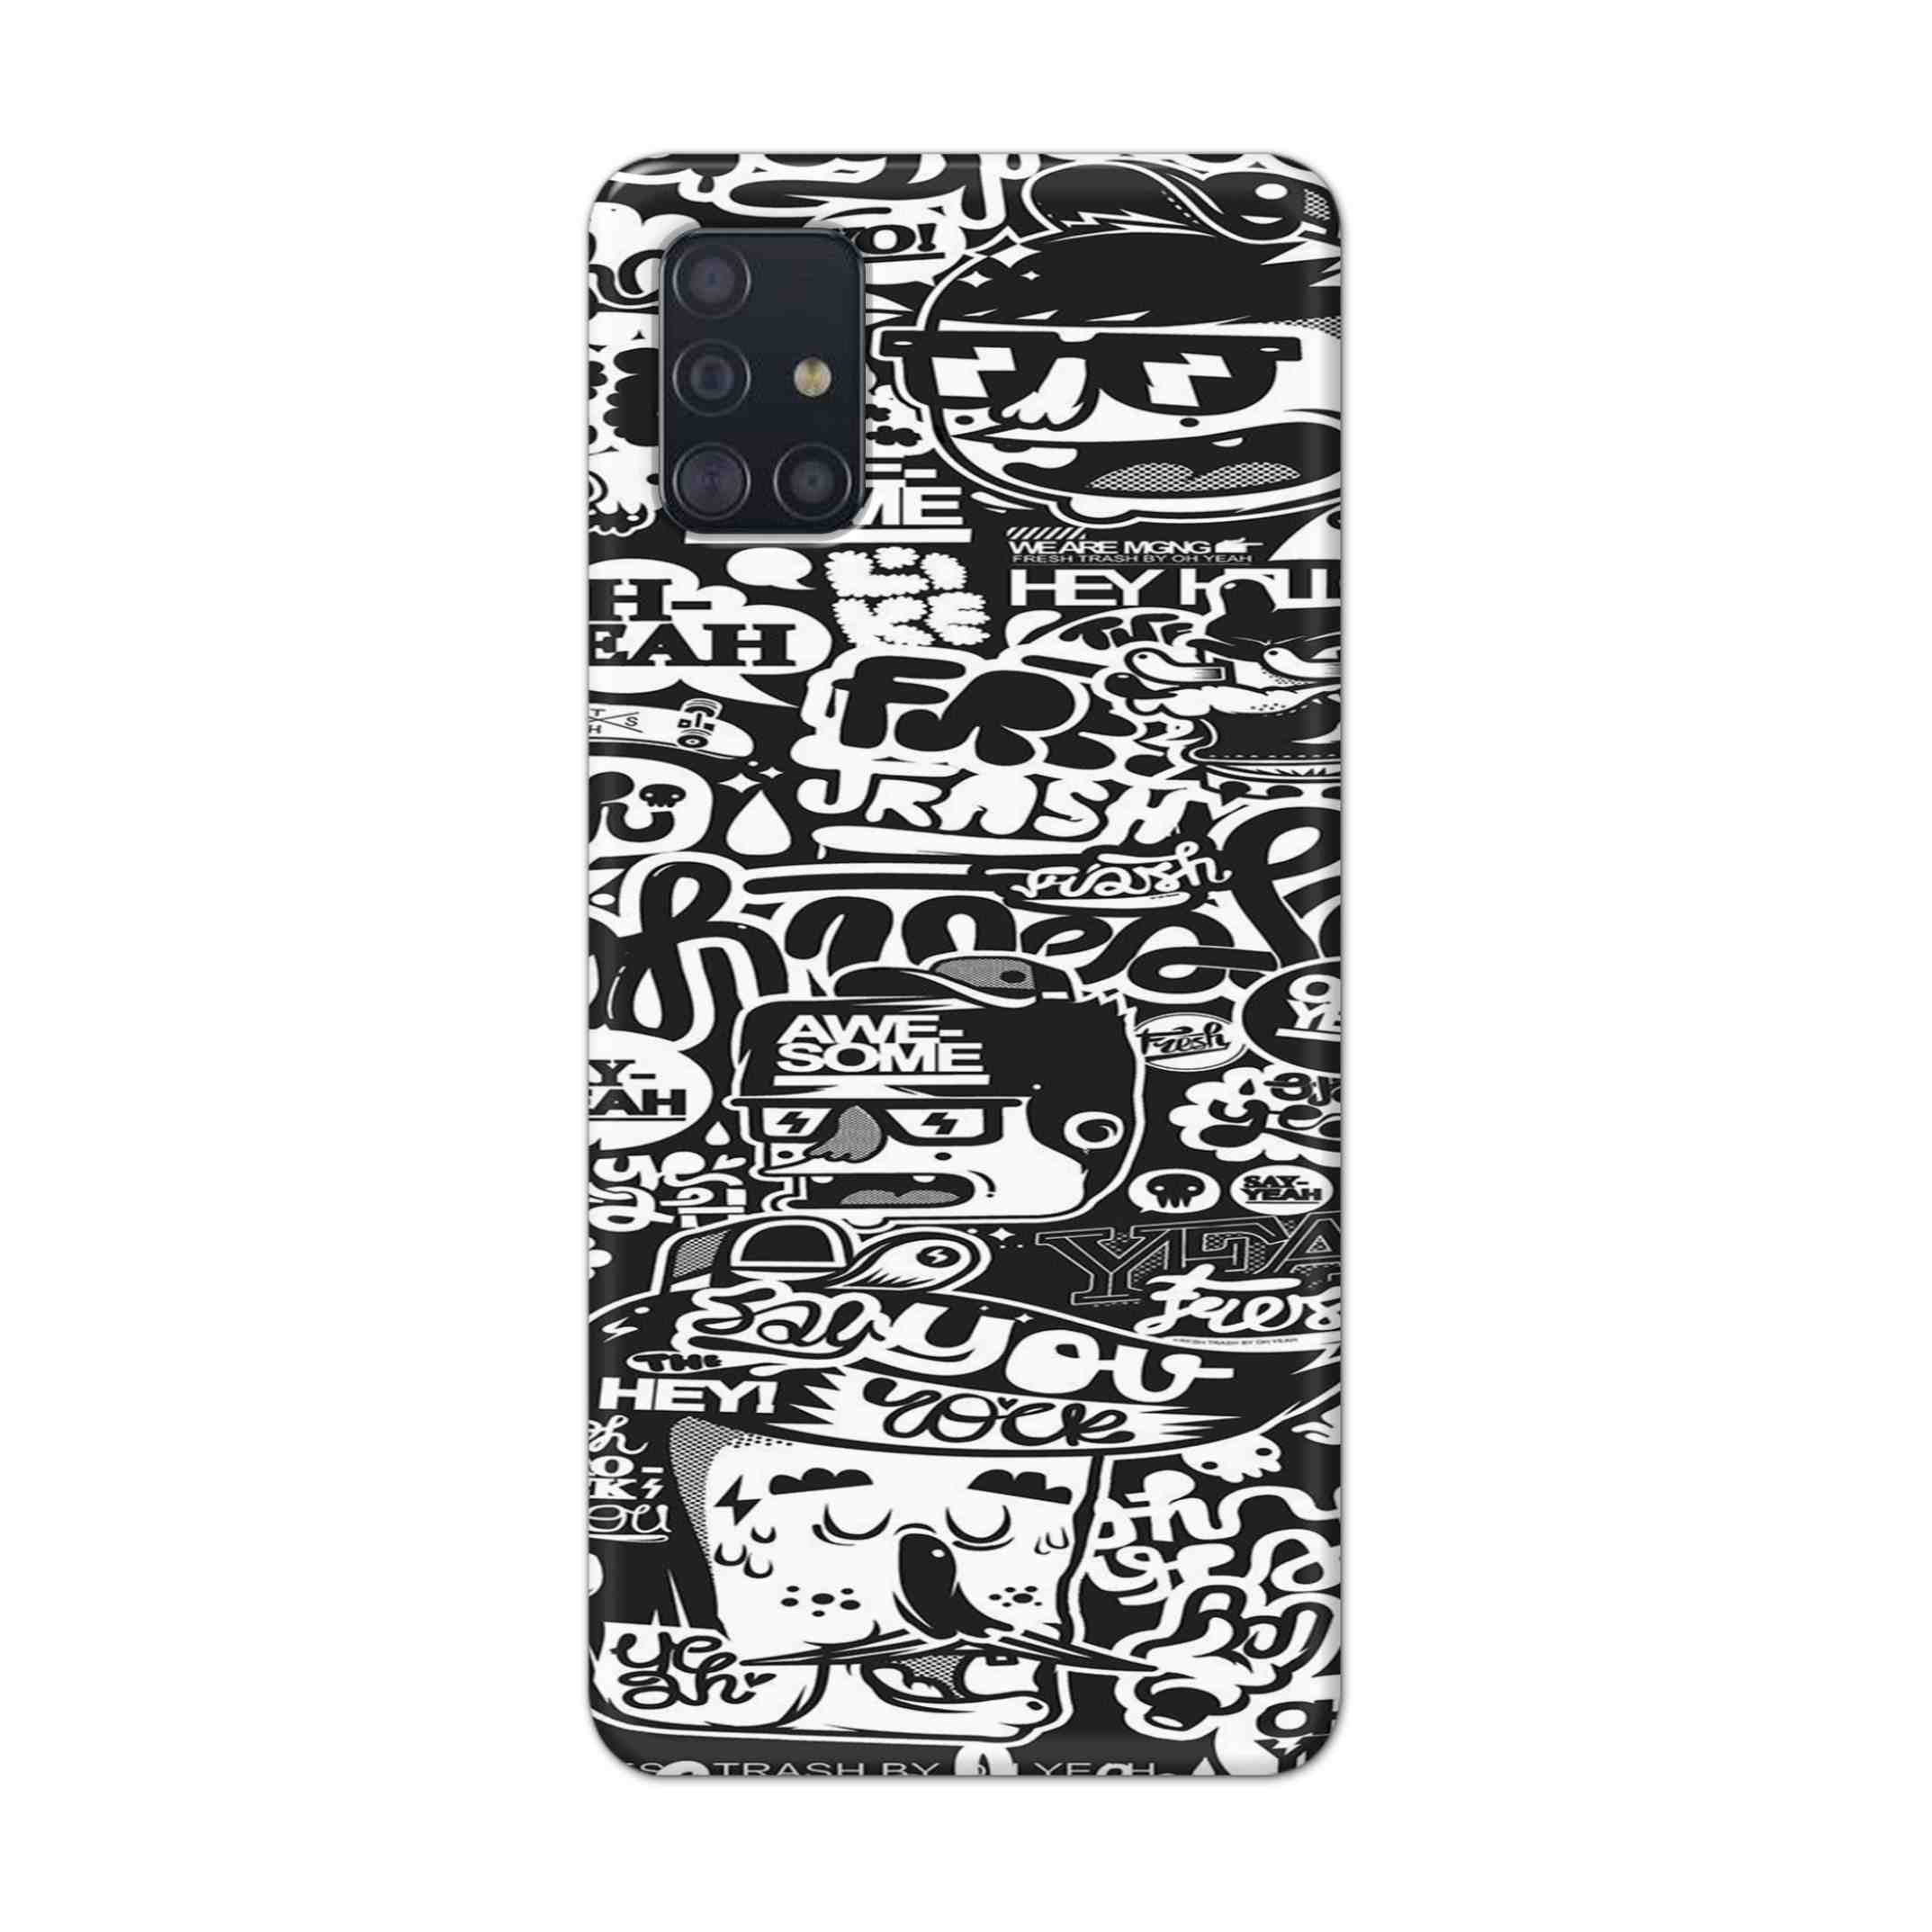 Buy Awesome Hard Back Mobile Phone Case Cover For Samsung Galaxy M31s Online